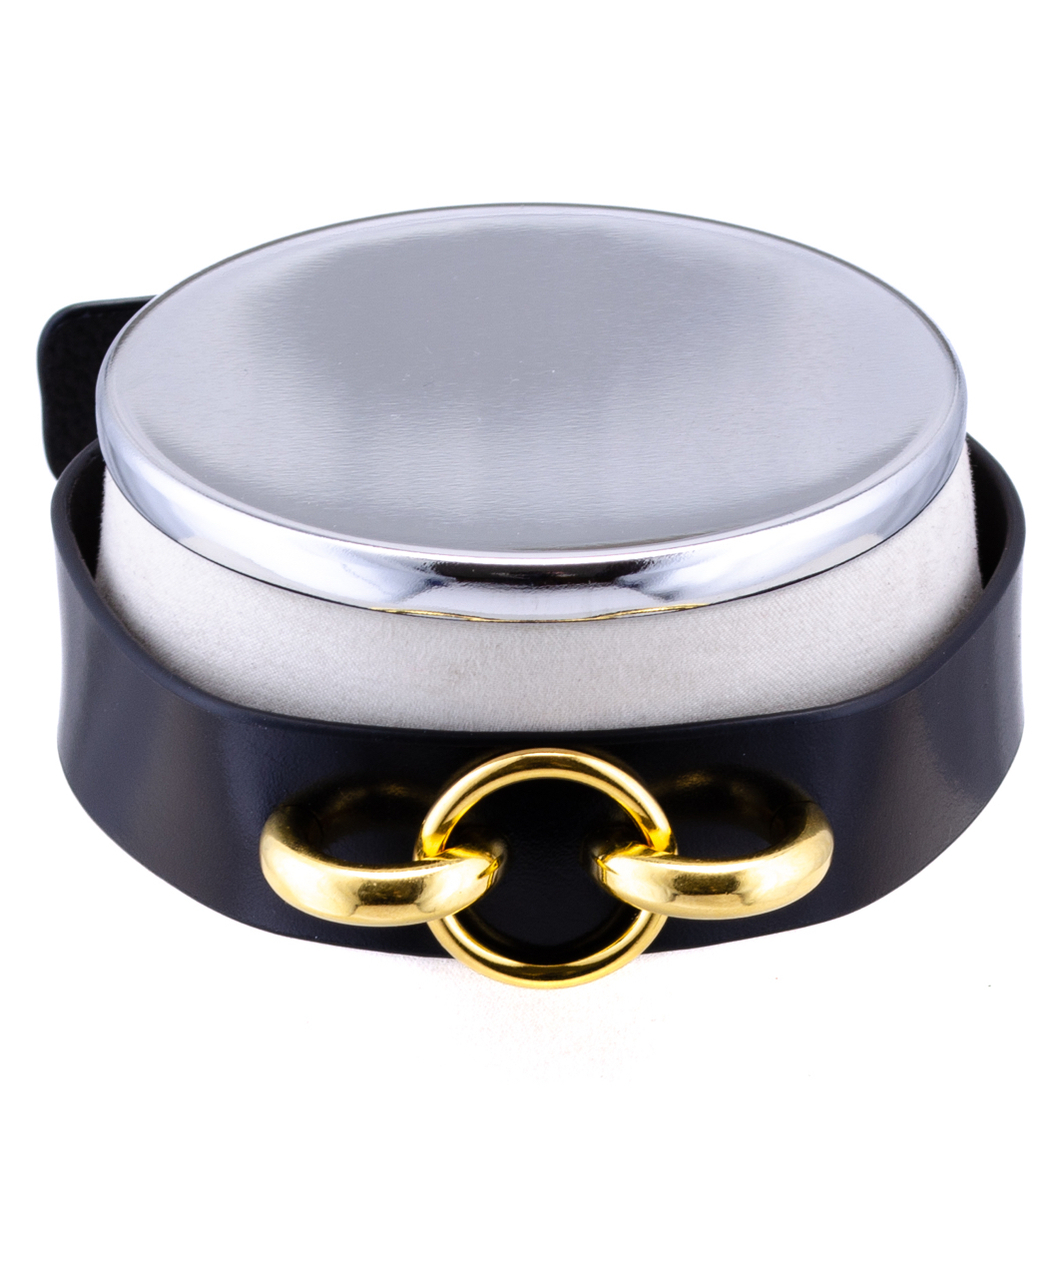 HEL Milano Camilla black leather collar with gold coloured ring